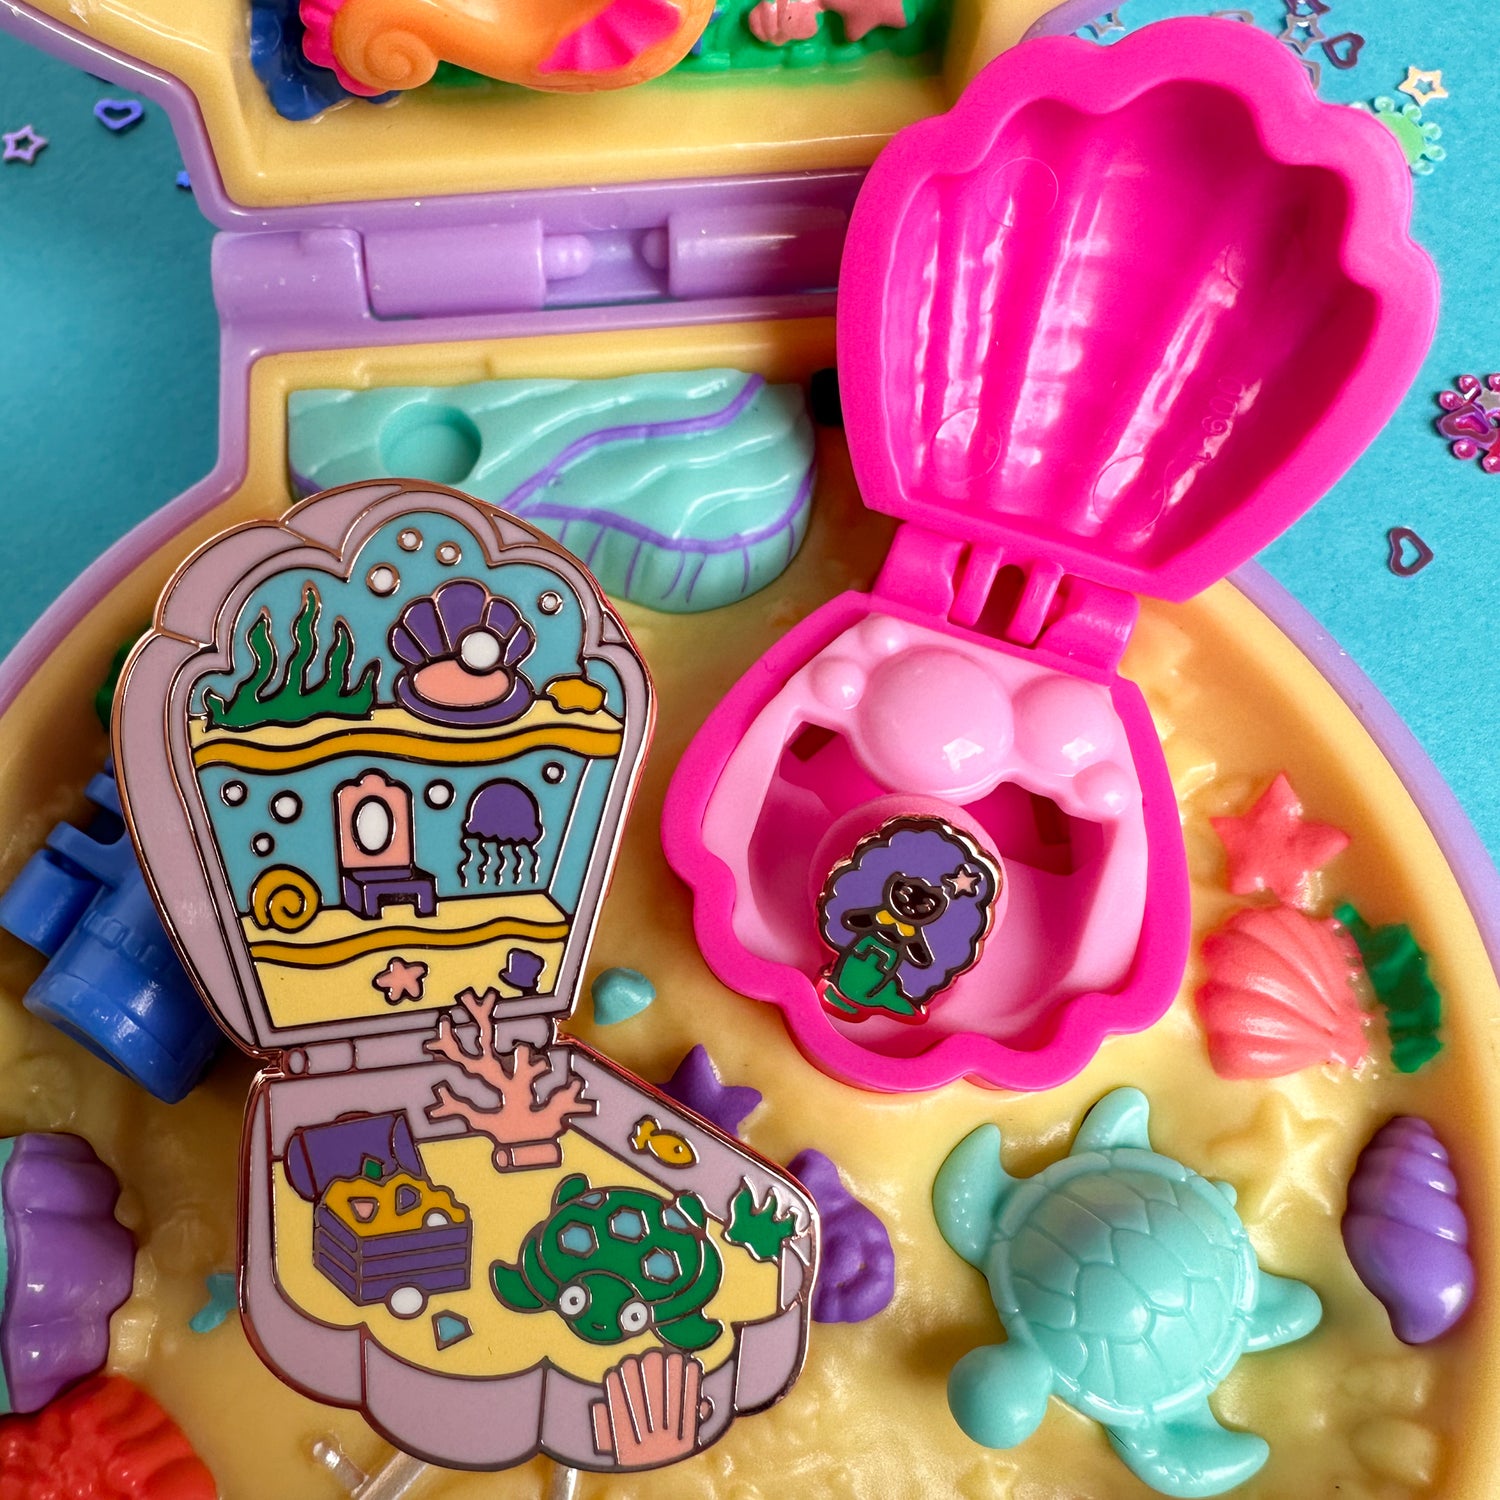 The mermaid pocket pin set resting in a real Polly Pocket mermaid set. The mermaid pin is inside a pink plastic shell.